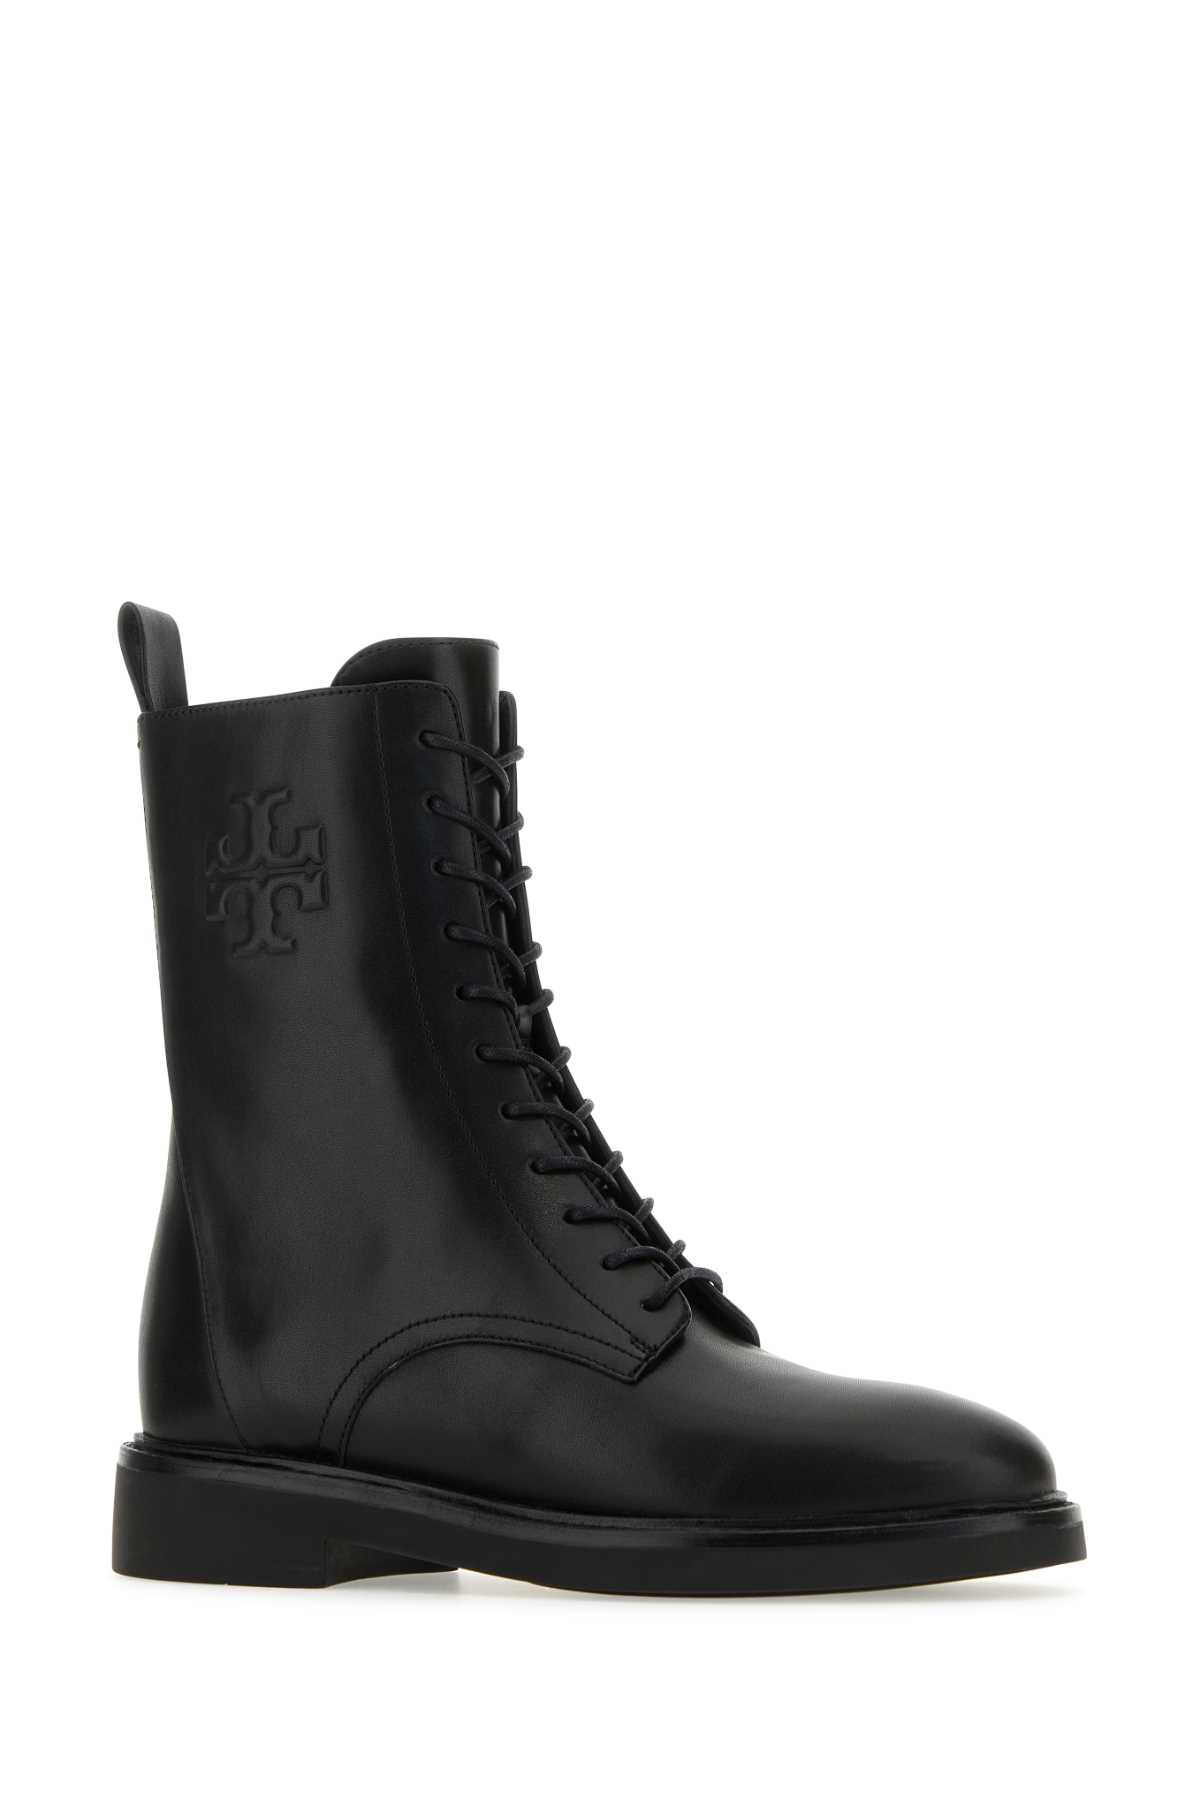 Tory Burch Black Leather Combat Ankle Boots In Perfectblackperfectblack